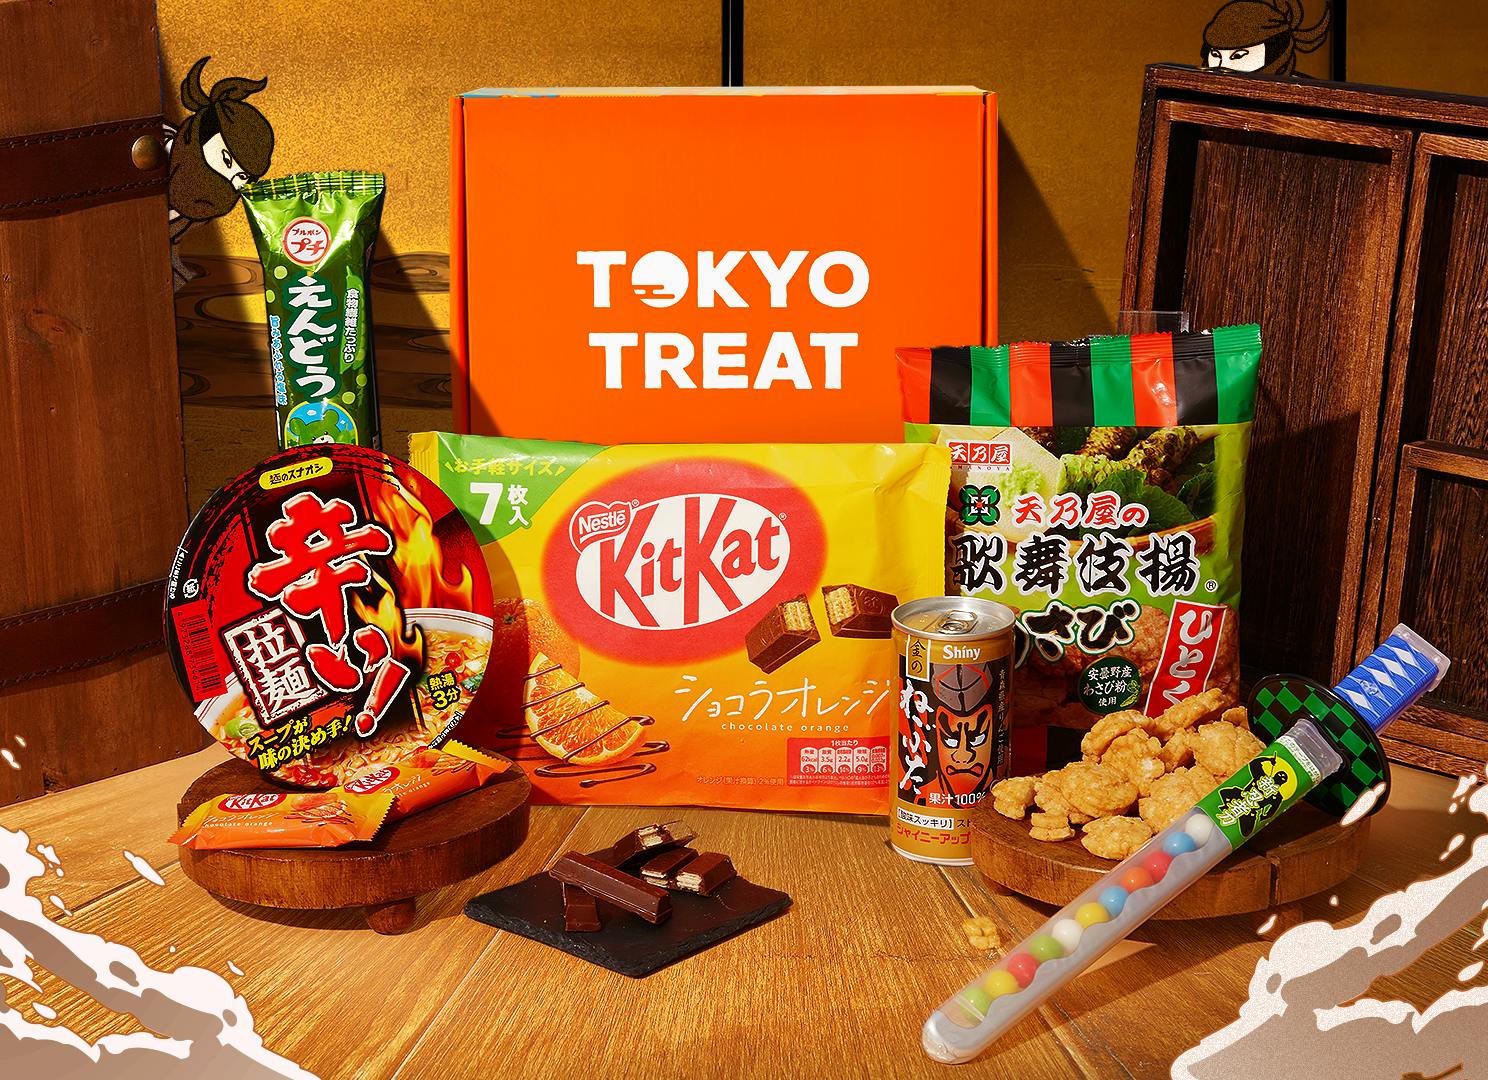 TokyoTreat Ninja Snackventure box sits inside an old wooden Japanese house, surrounded by box main items.